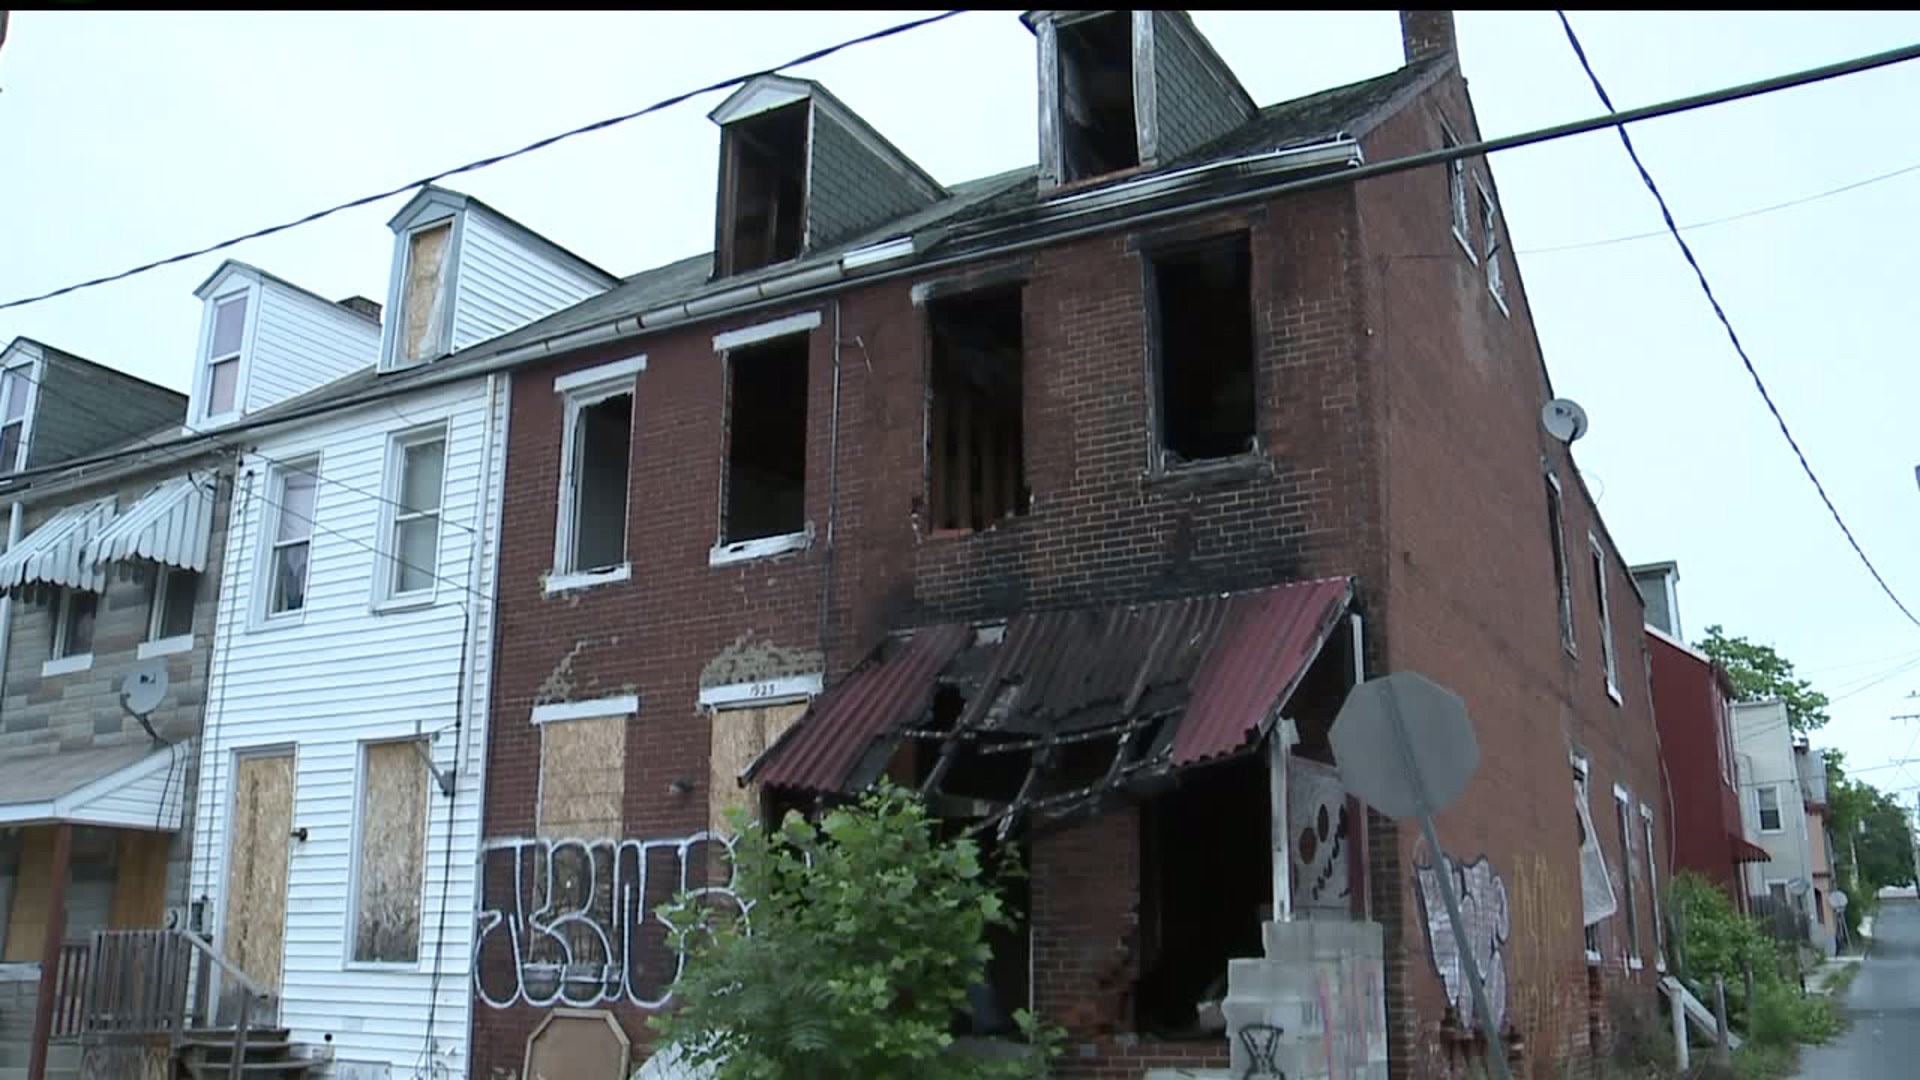 Officials discuss blight at roundtable in Harrisburg, a city with 447 condemned properties